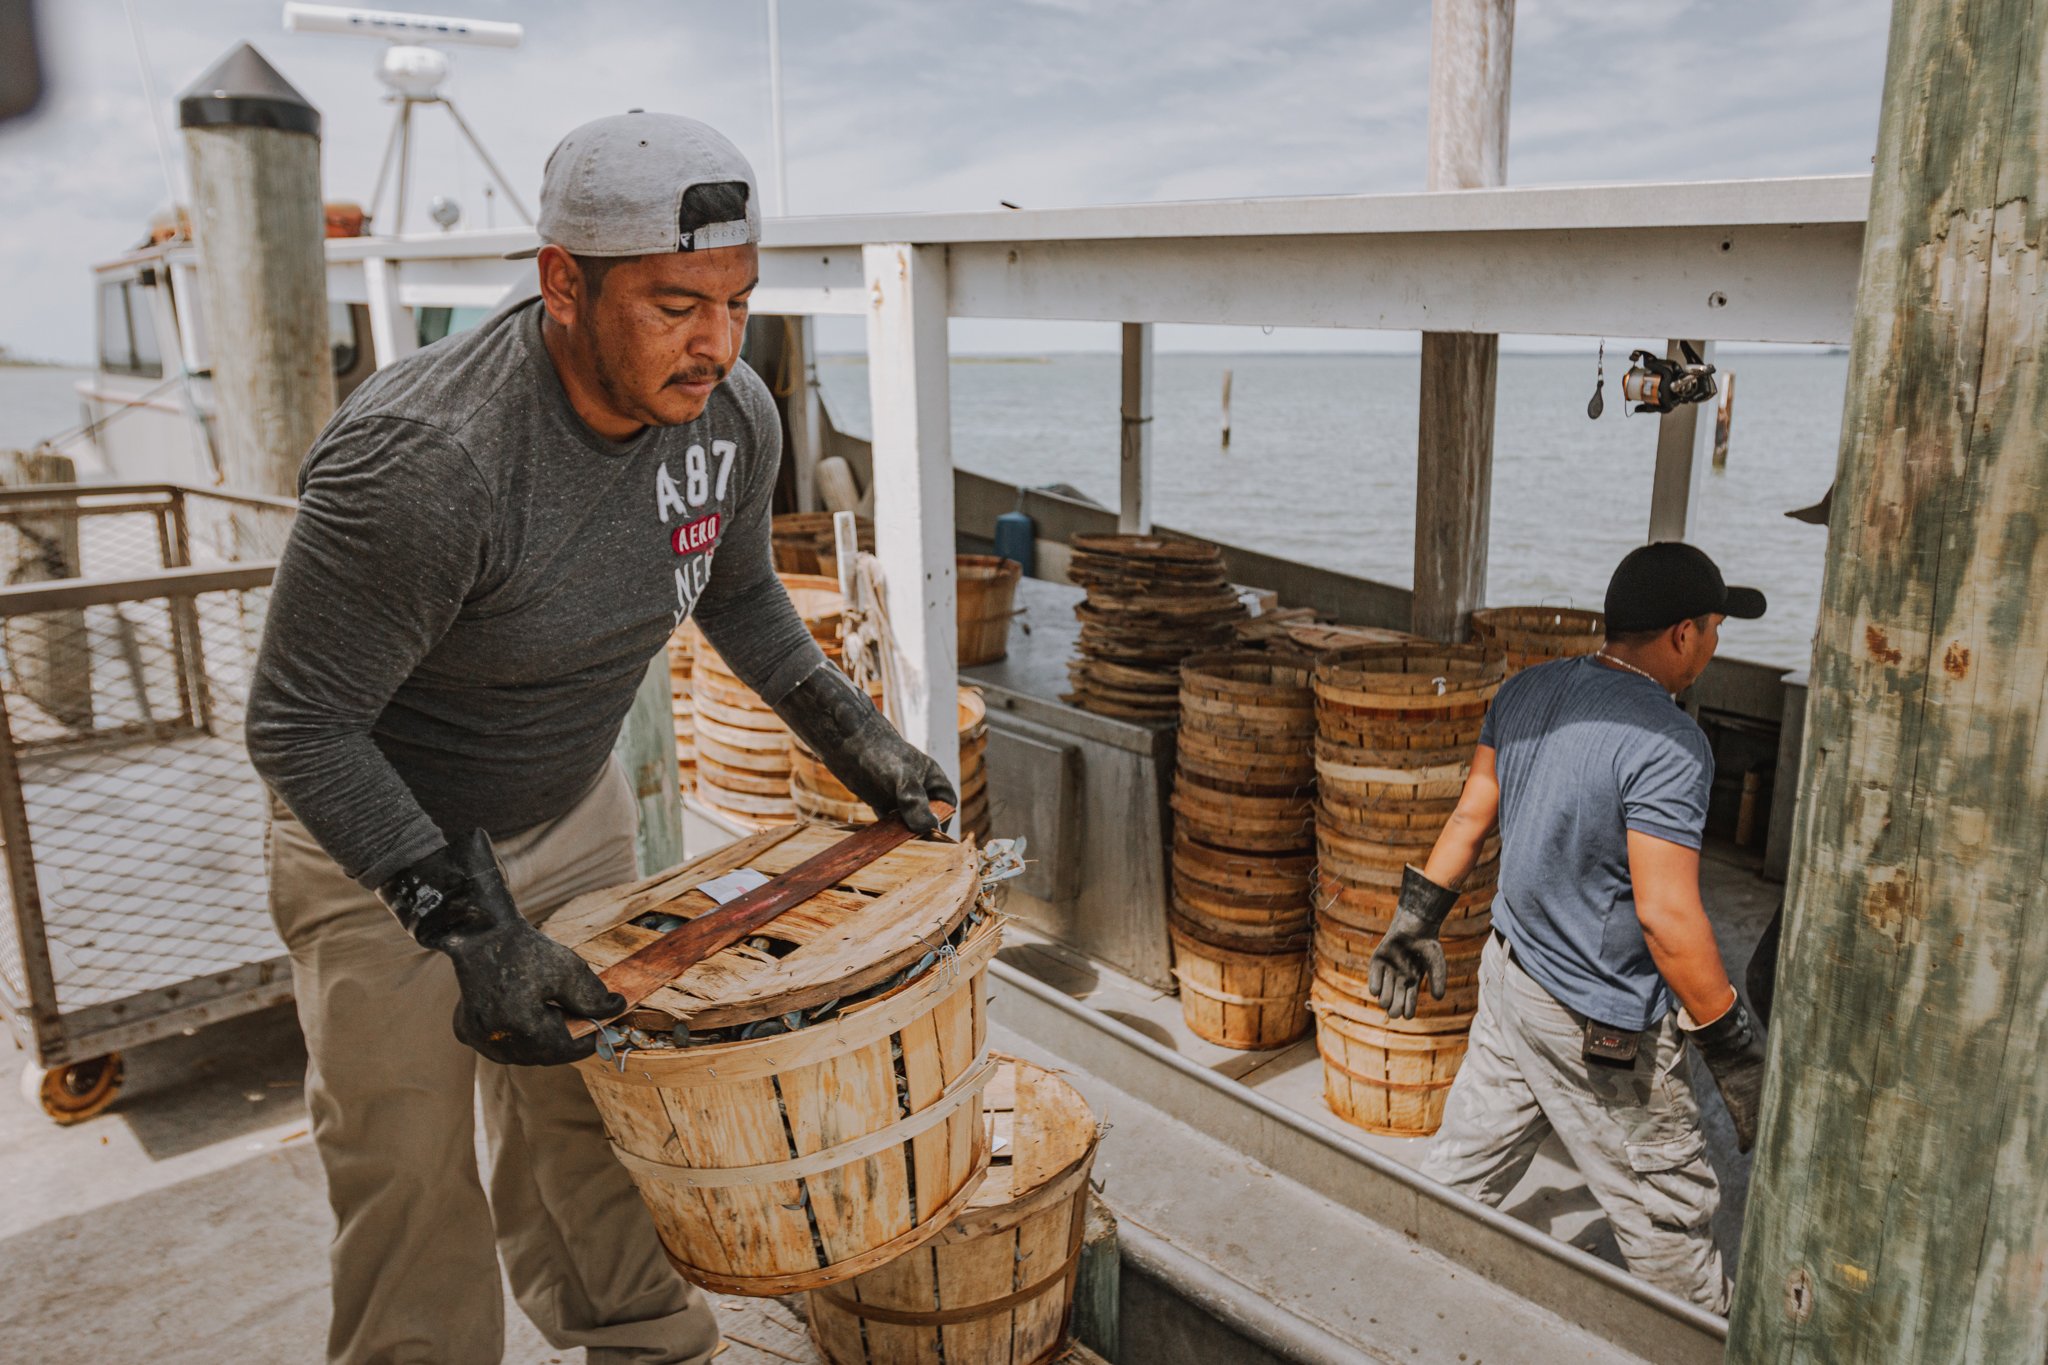  Patricio Tovar Herrera, 27, of San Luis Potosí (left) and Sergio González, 26, of Veracruz Mexico (right) help discharge a Lindy’s Seafood boat carrying hundreds of blue crabs from Tangier Island. Visa shortages have been a problem for the seafood